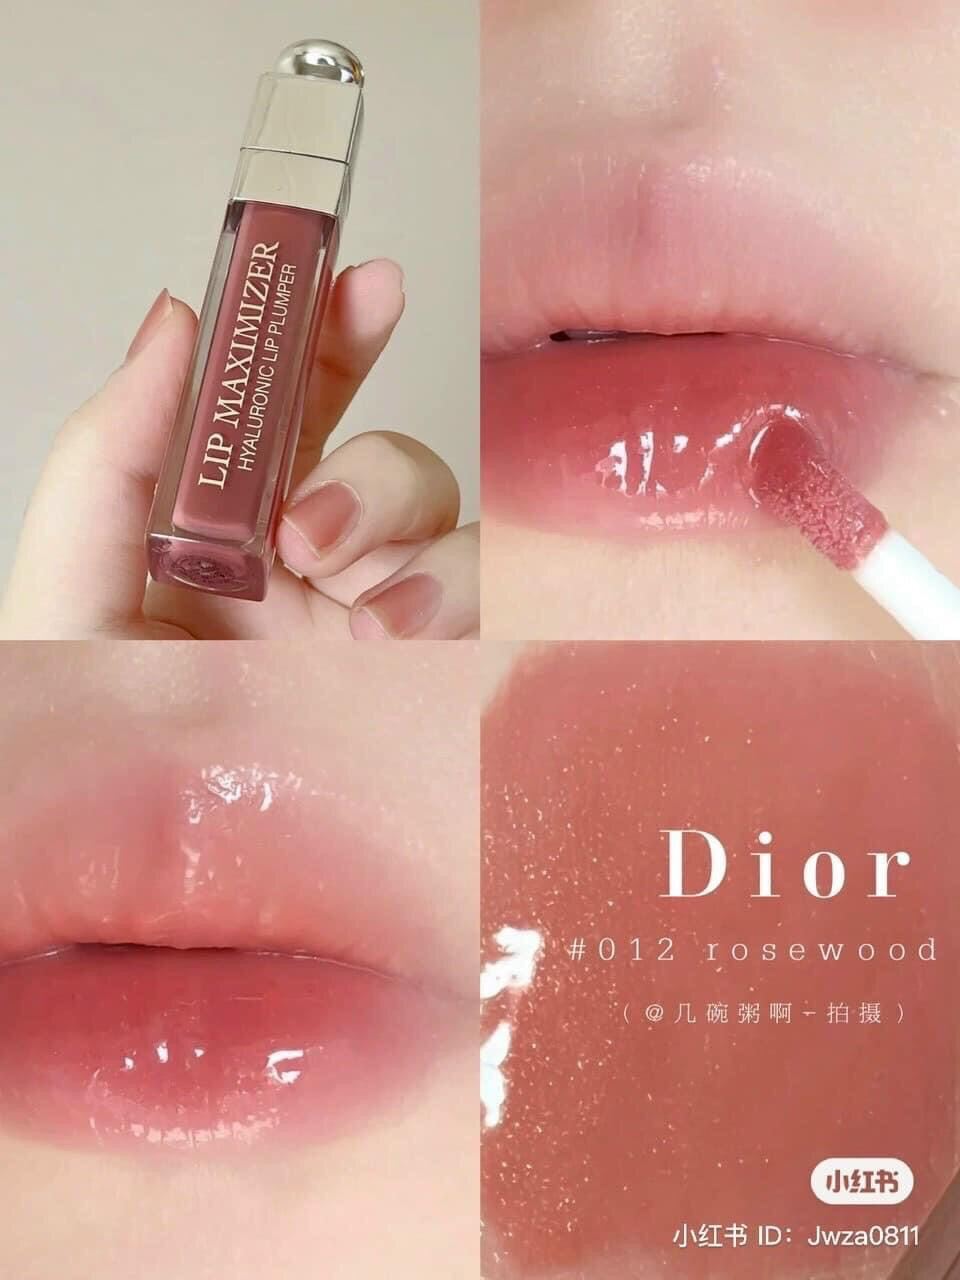 Dior Crème de Rose Smoothing Plumping Lip Balm SPF 10 Review  Swatches